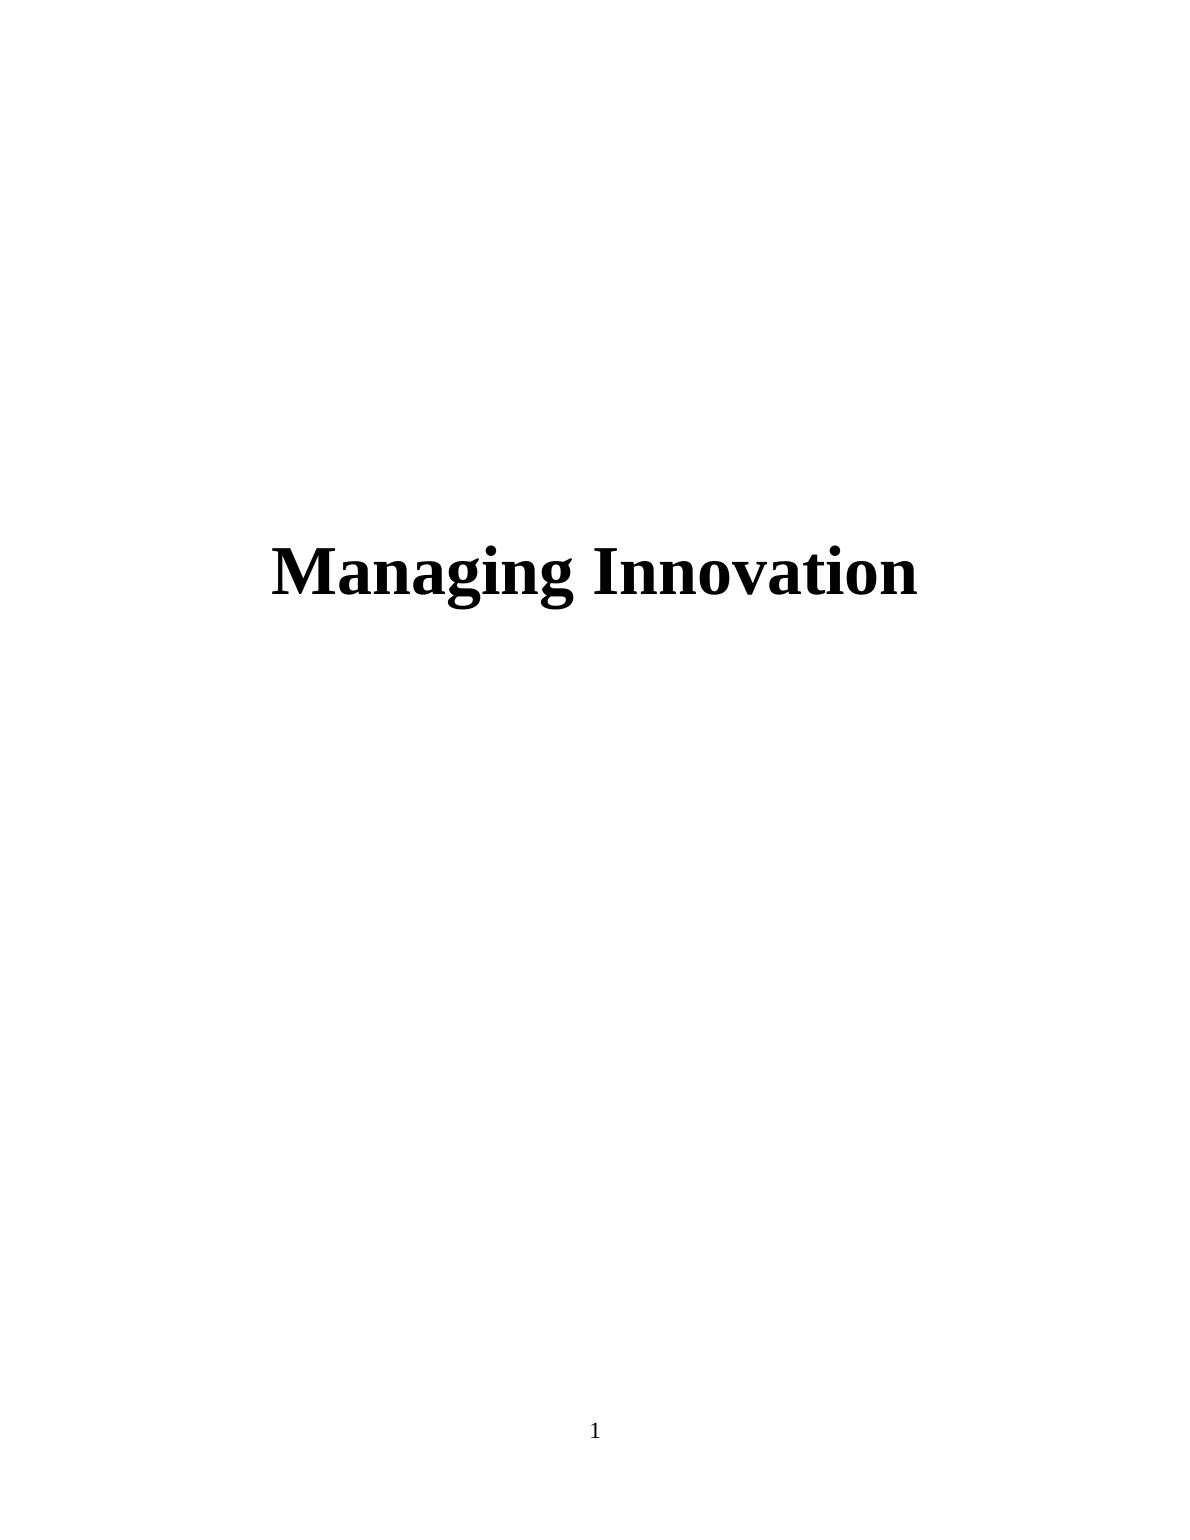 Managing Innovation in Business: Strategies and Theories_1